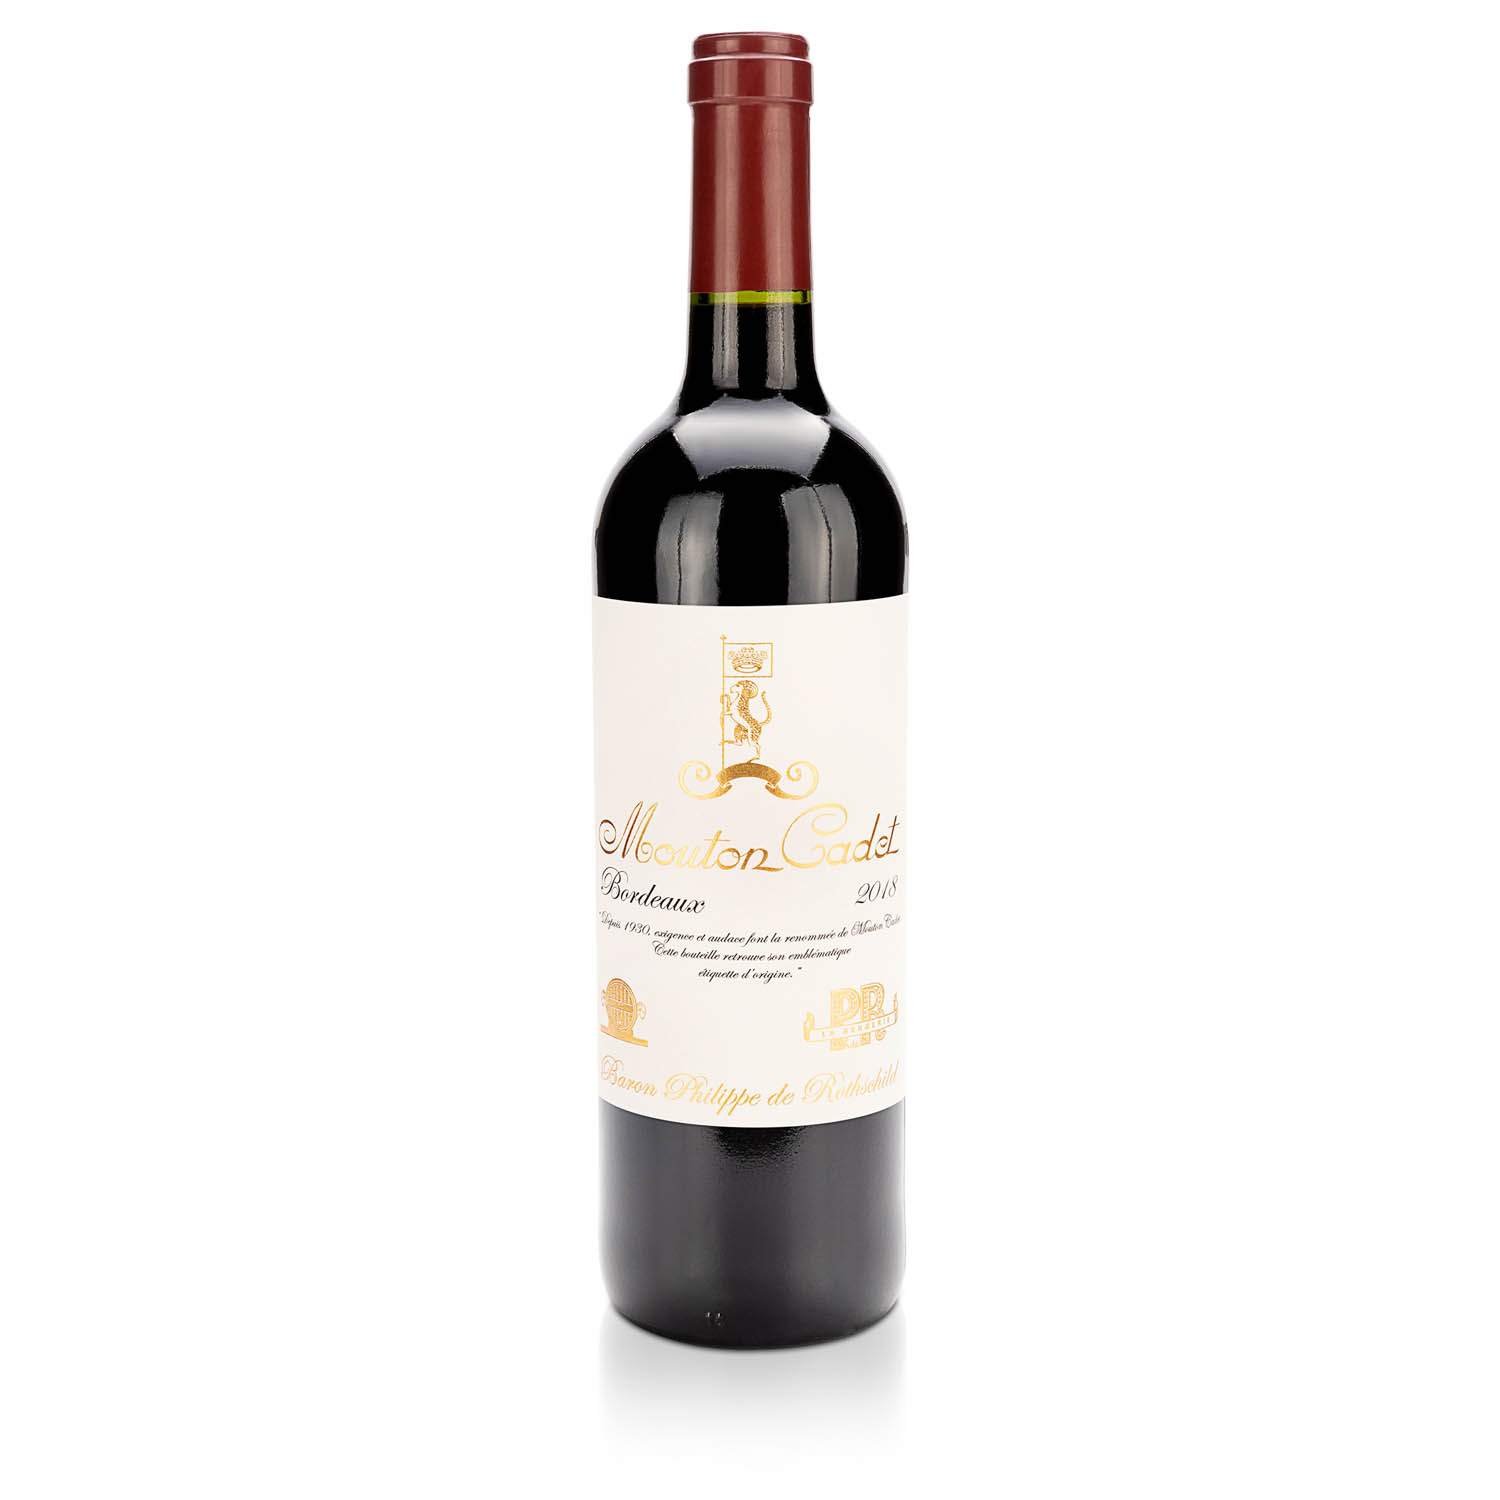 Mouton Cad. - Heritage rouge